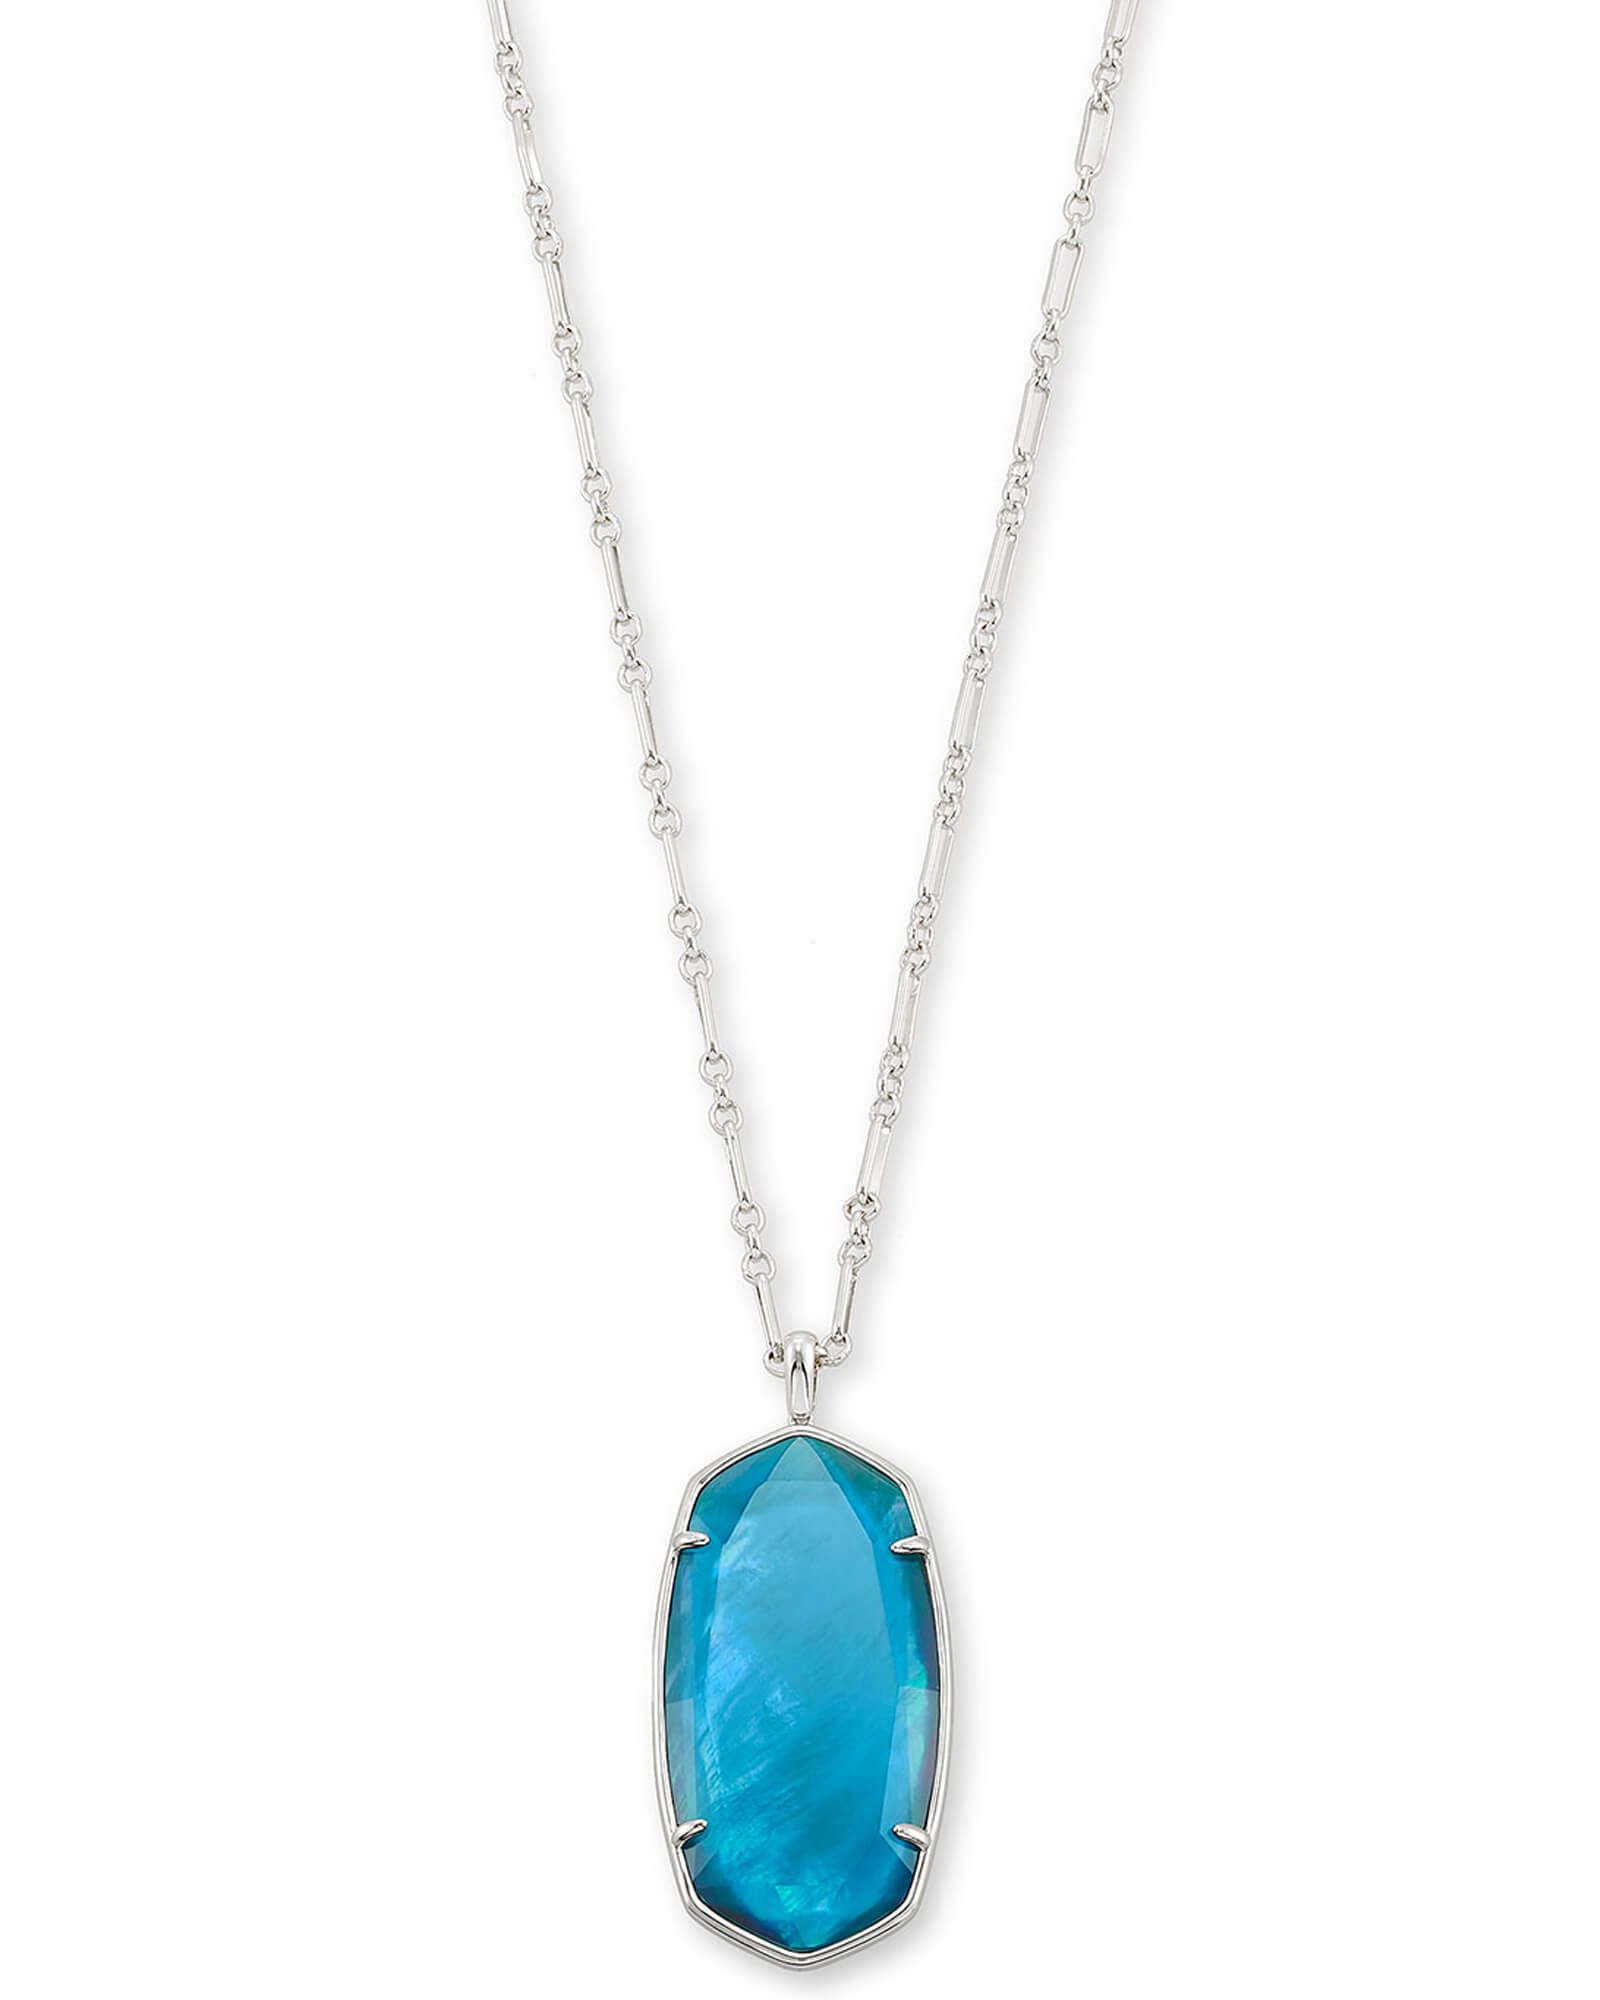 Faceted Reid Silver Long Pendant Necklace in Peacock Blue Illusion | Kendra Scott